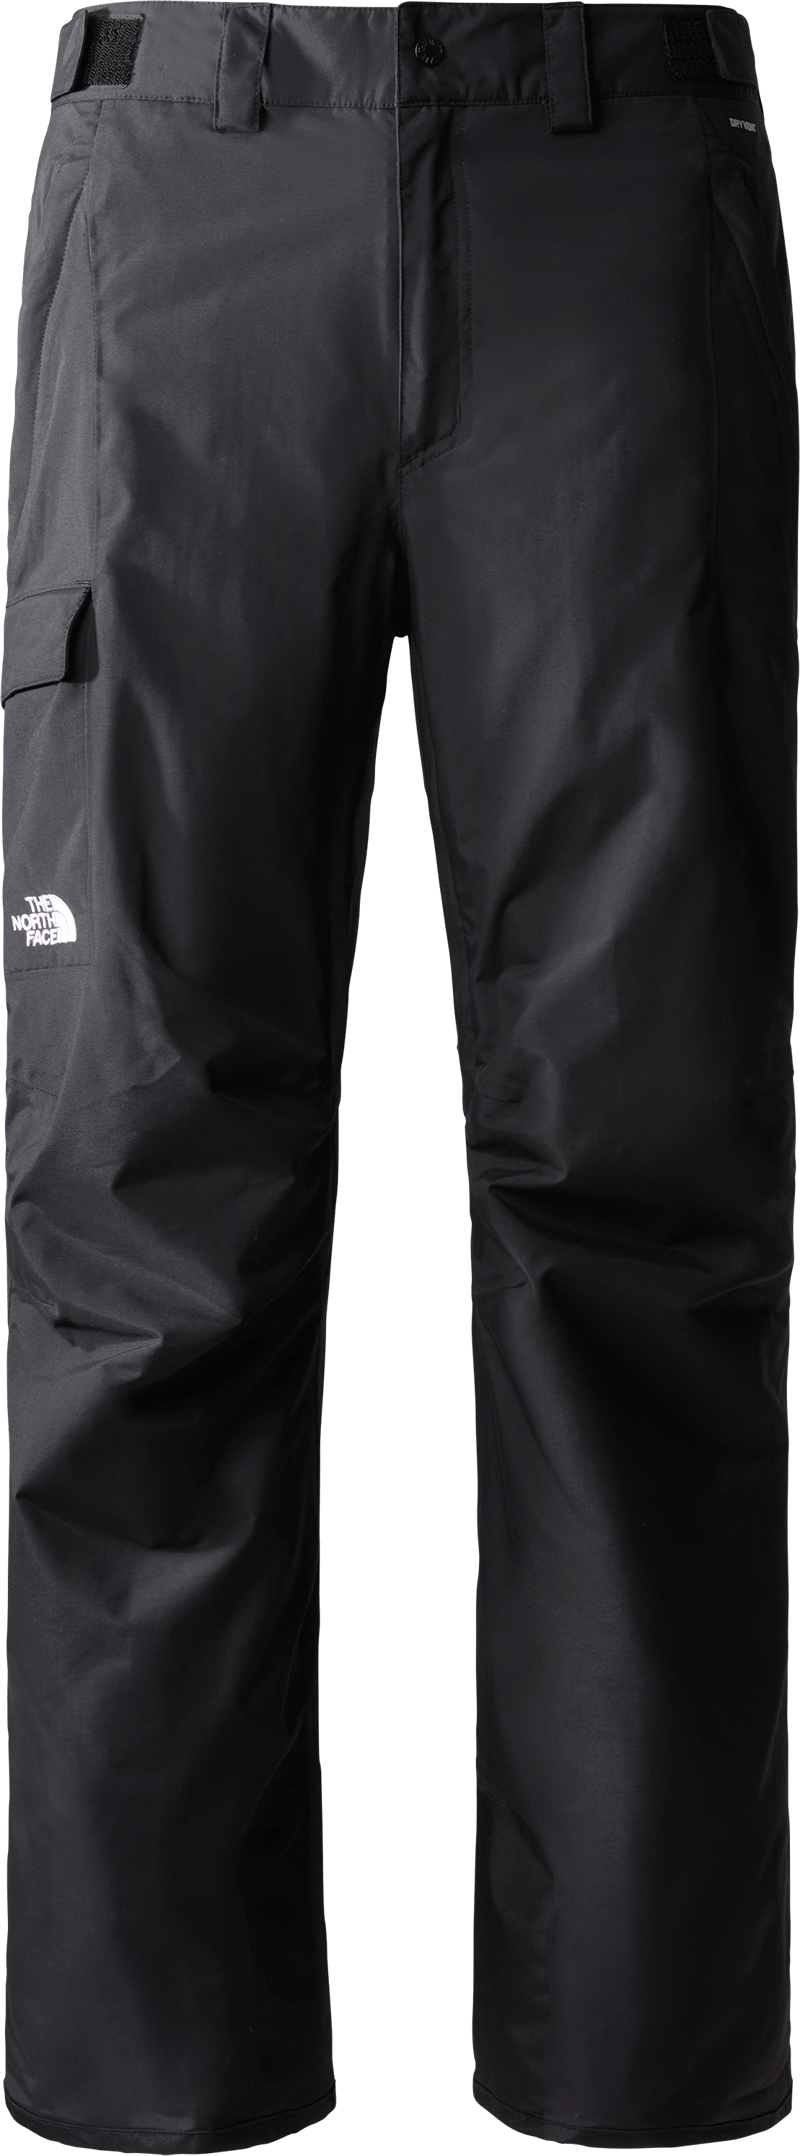 Buy Men's Freedom Insulated Pant Tnf Black here | Outnorth